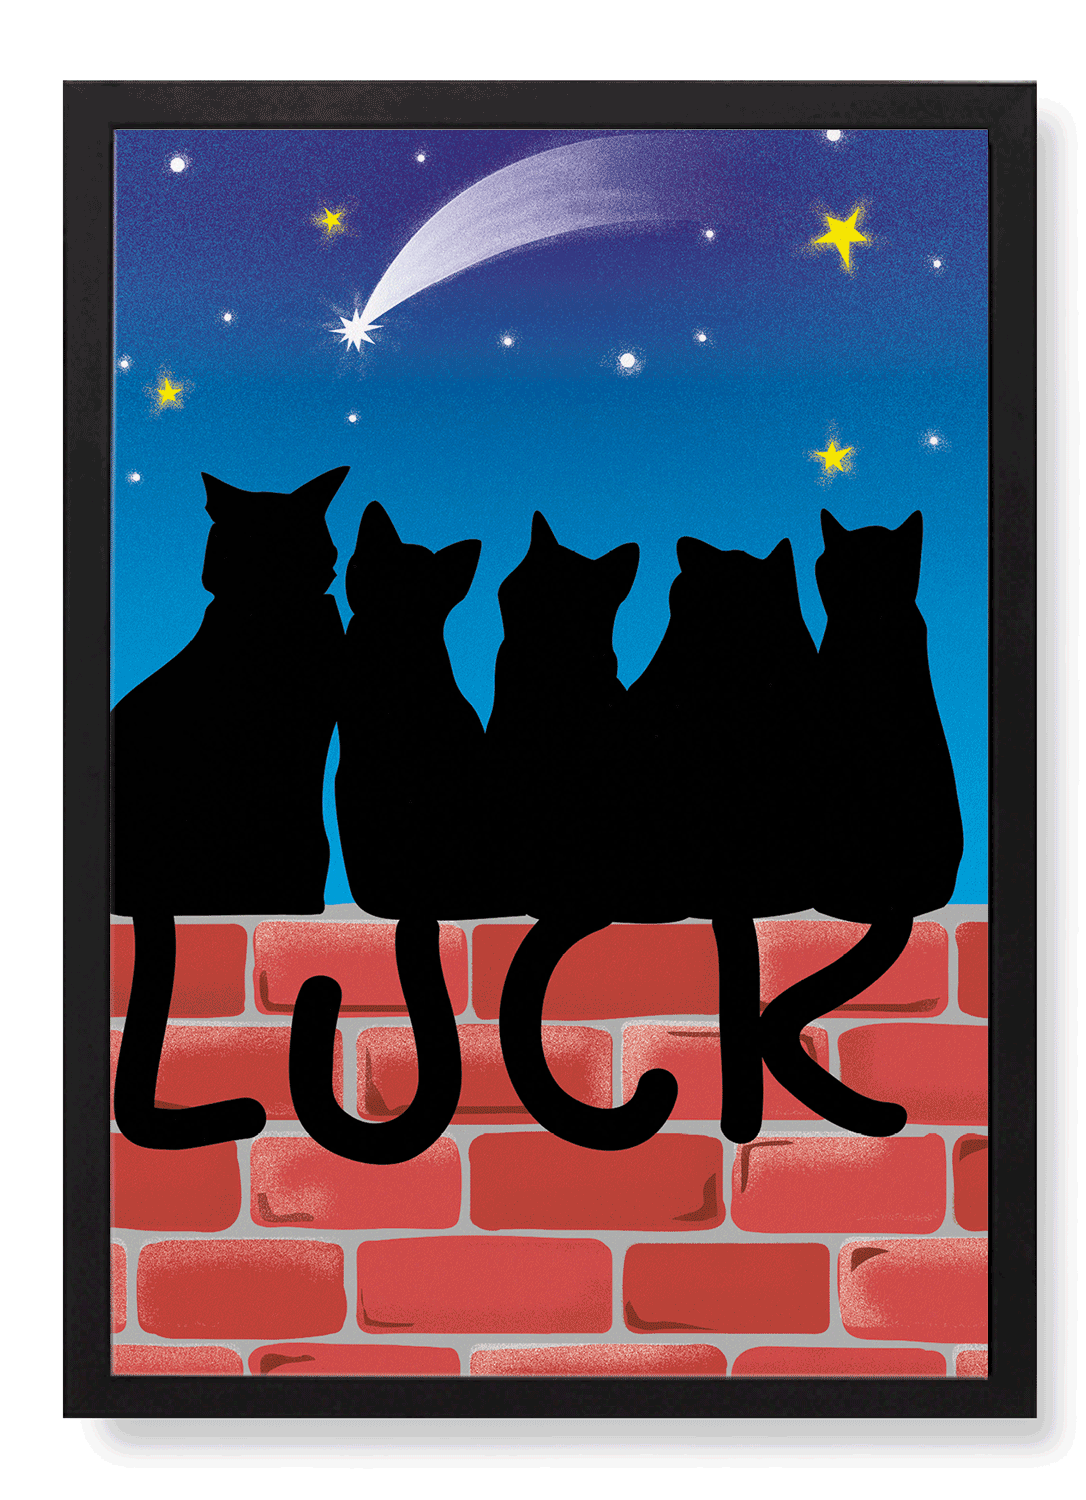 LUCKY BLACK CATS